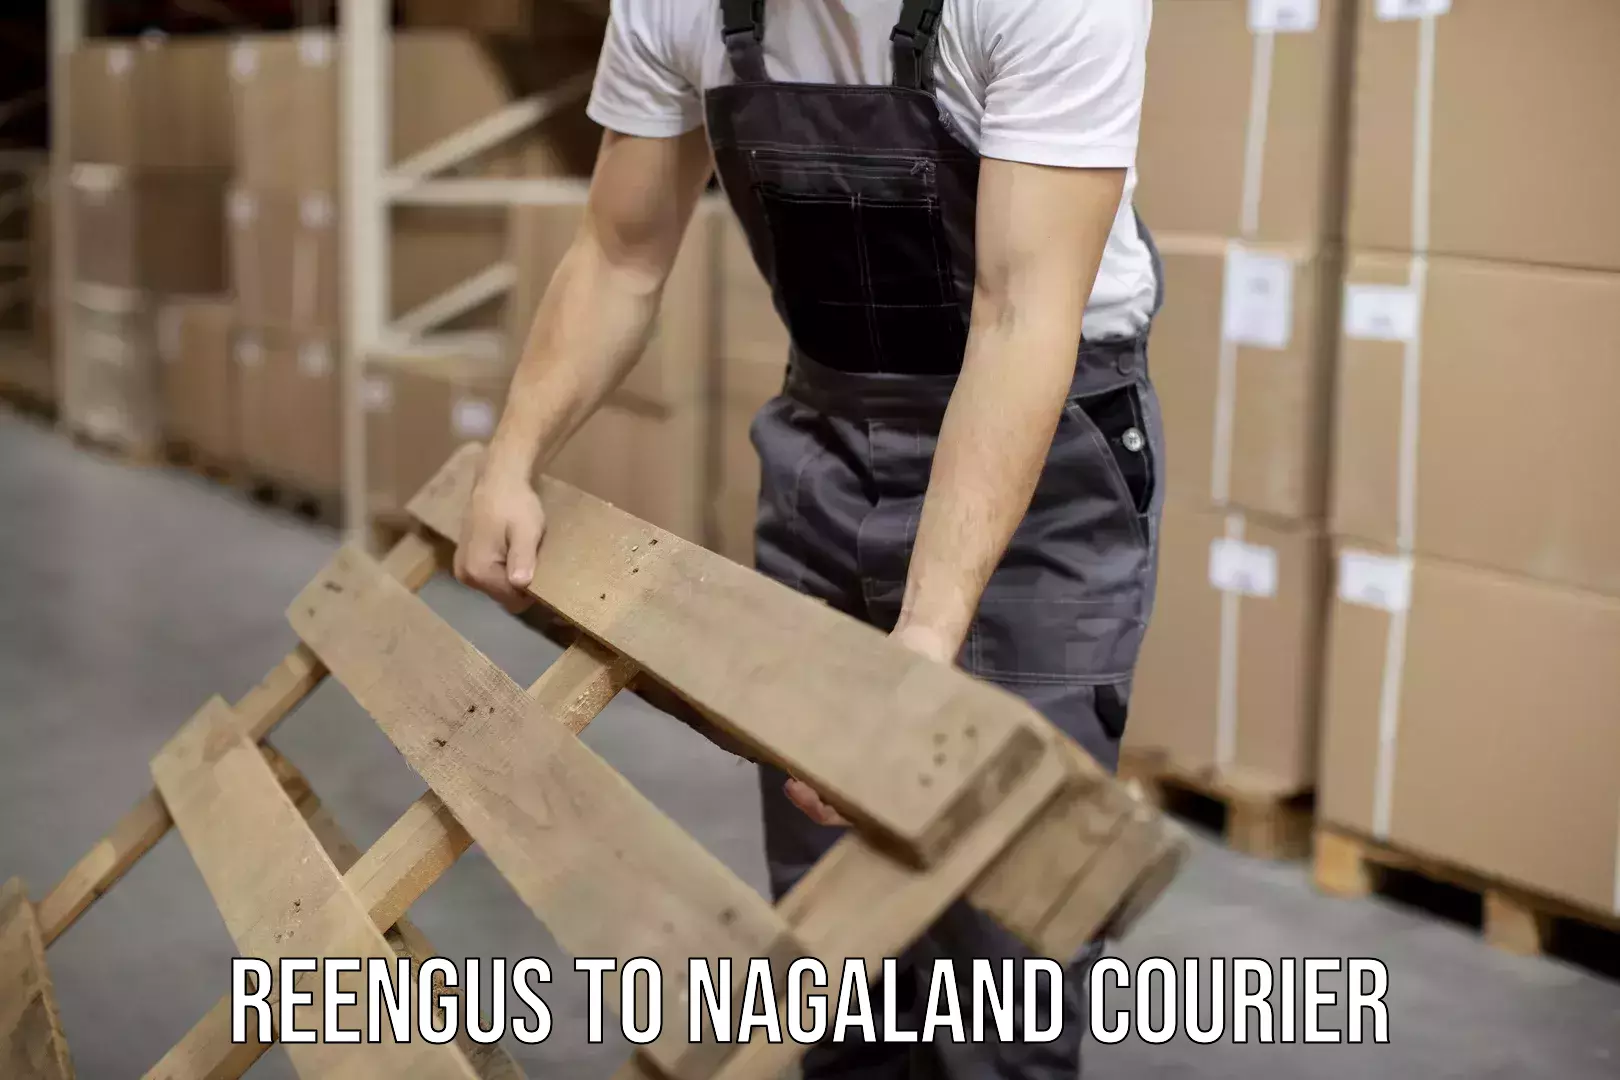 Professional courier services Reengus to Nagaland